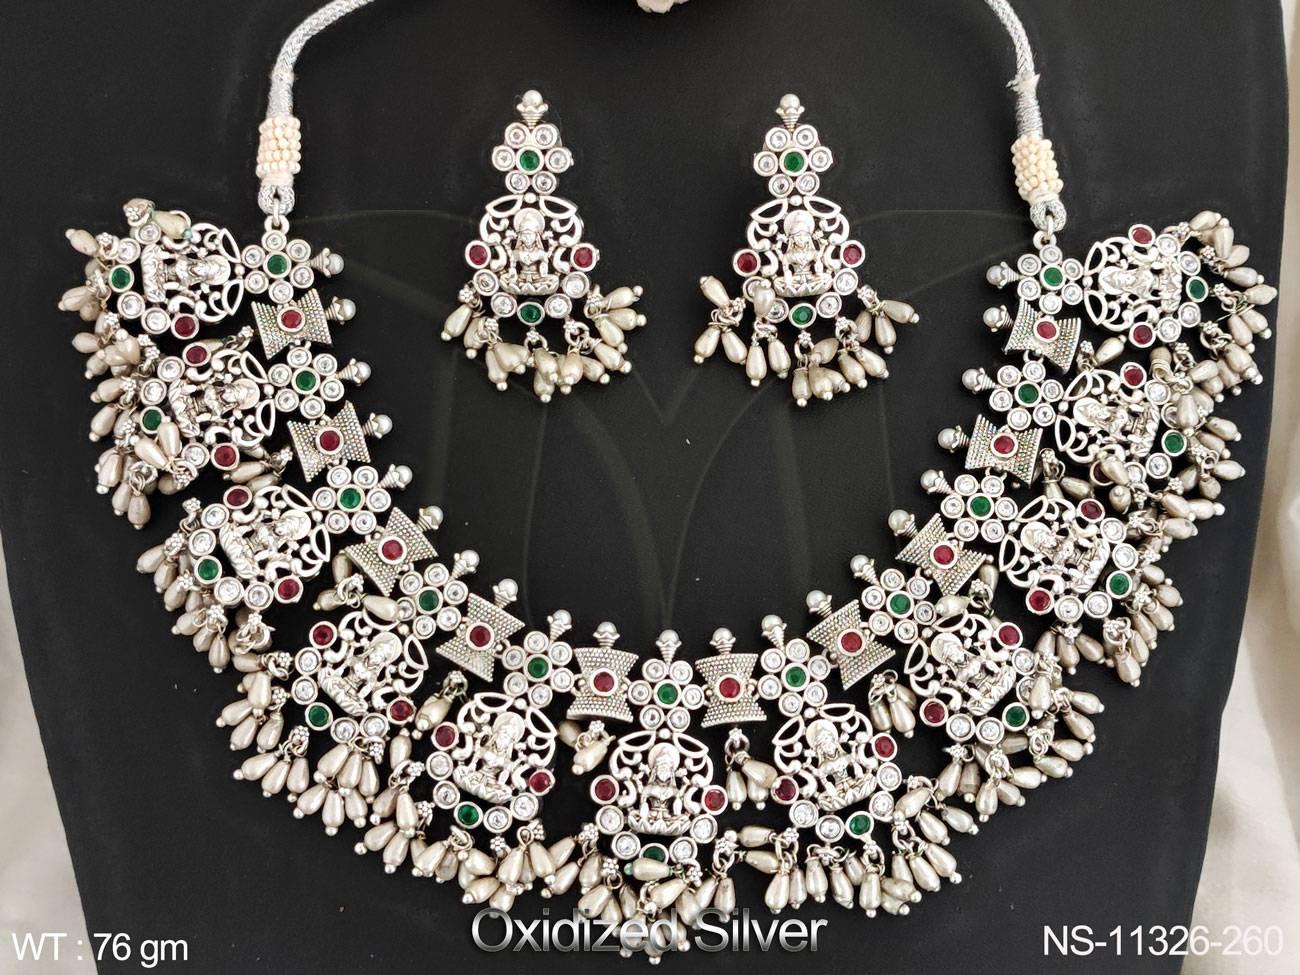 This stunning Temple Jewellery Short Necklace Set features an intricate Laxmi design with oxidised silver polish, giving it a unique and elegant look.